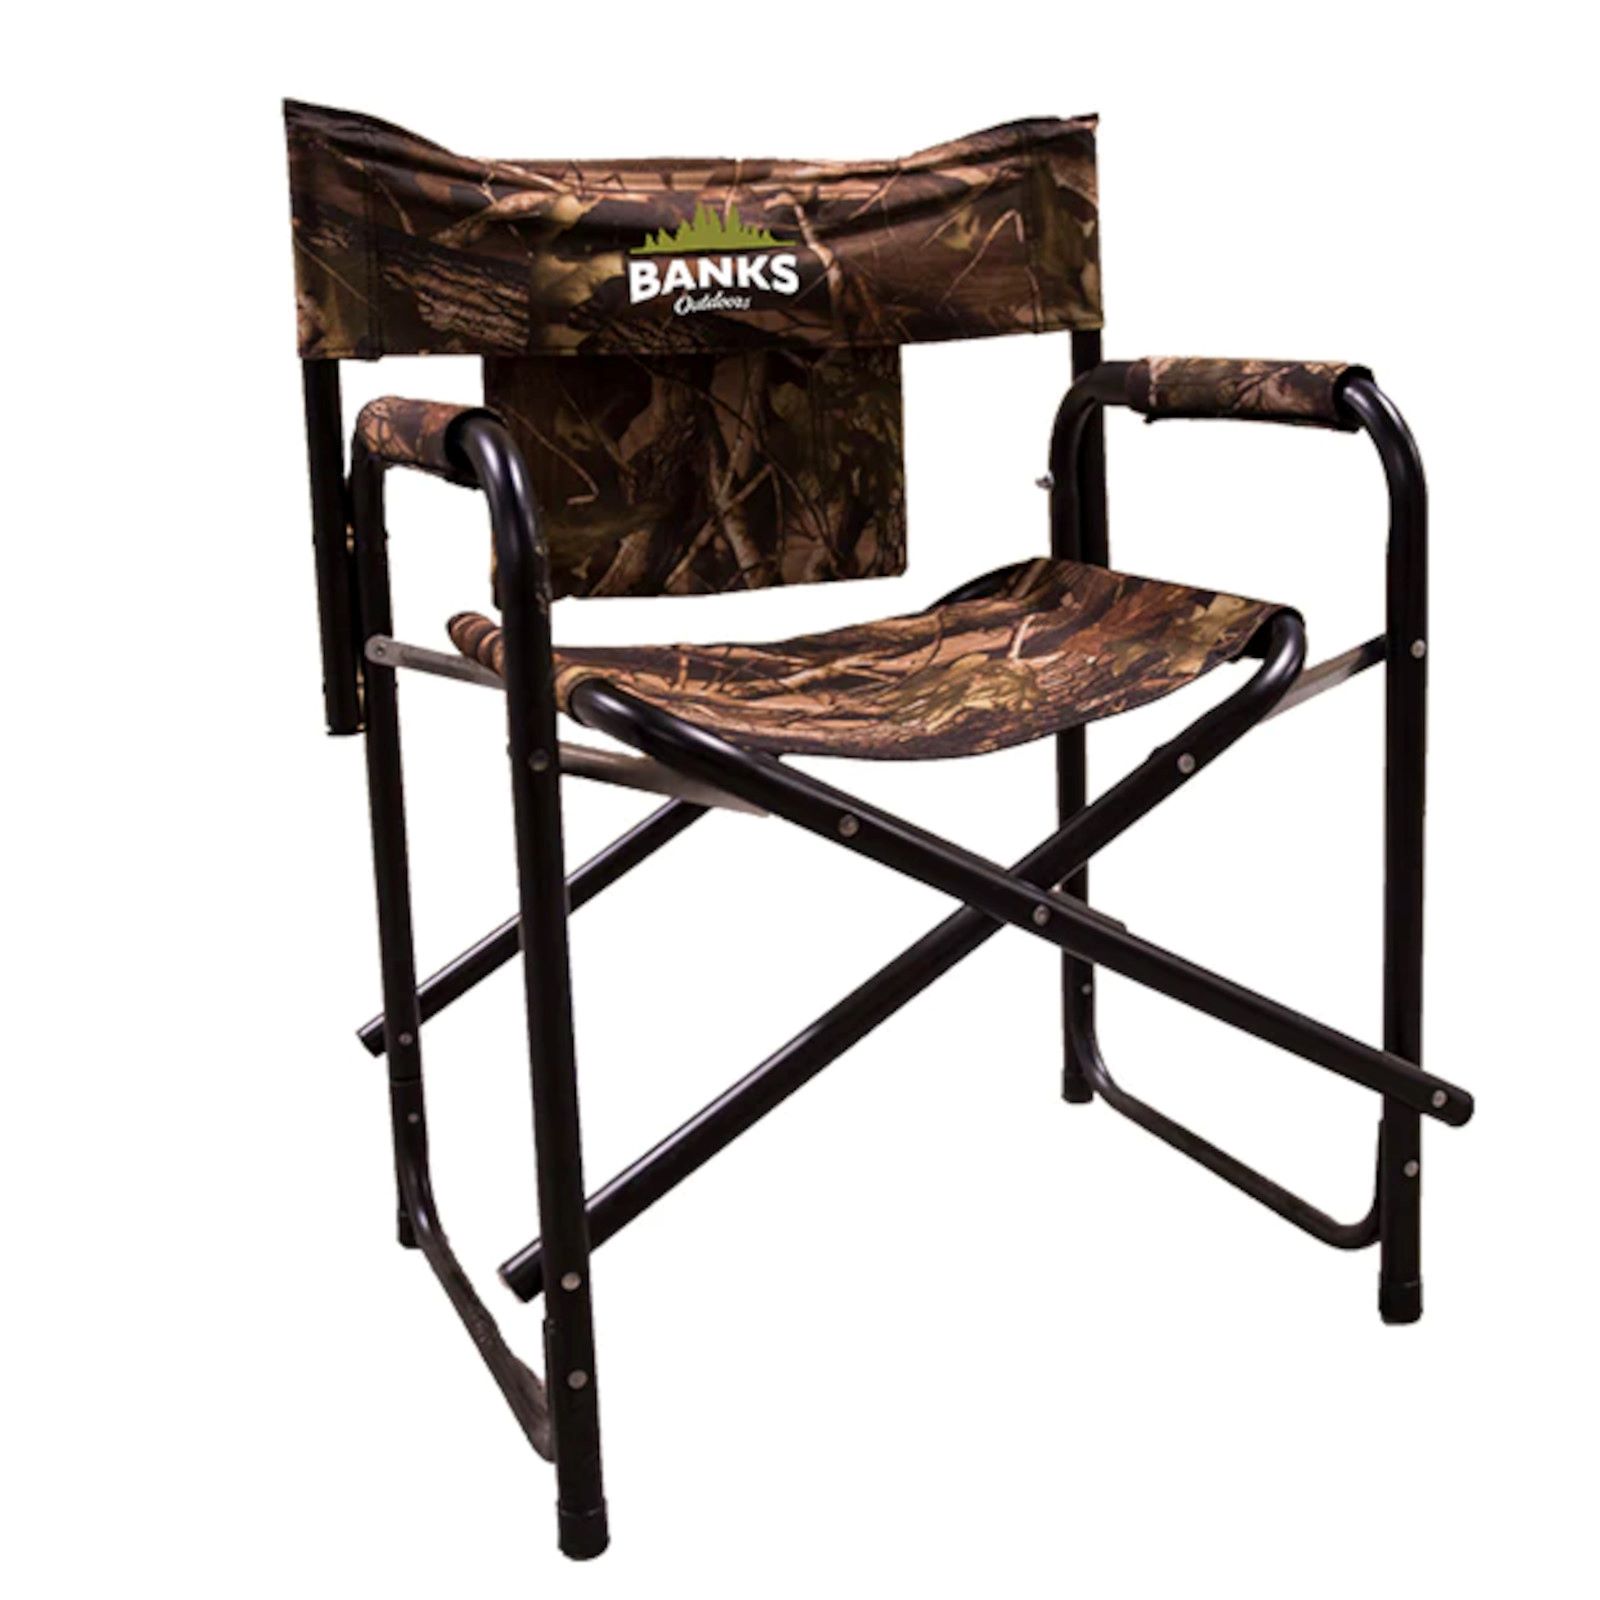 Banks Outdoors Stump Chair